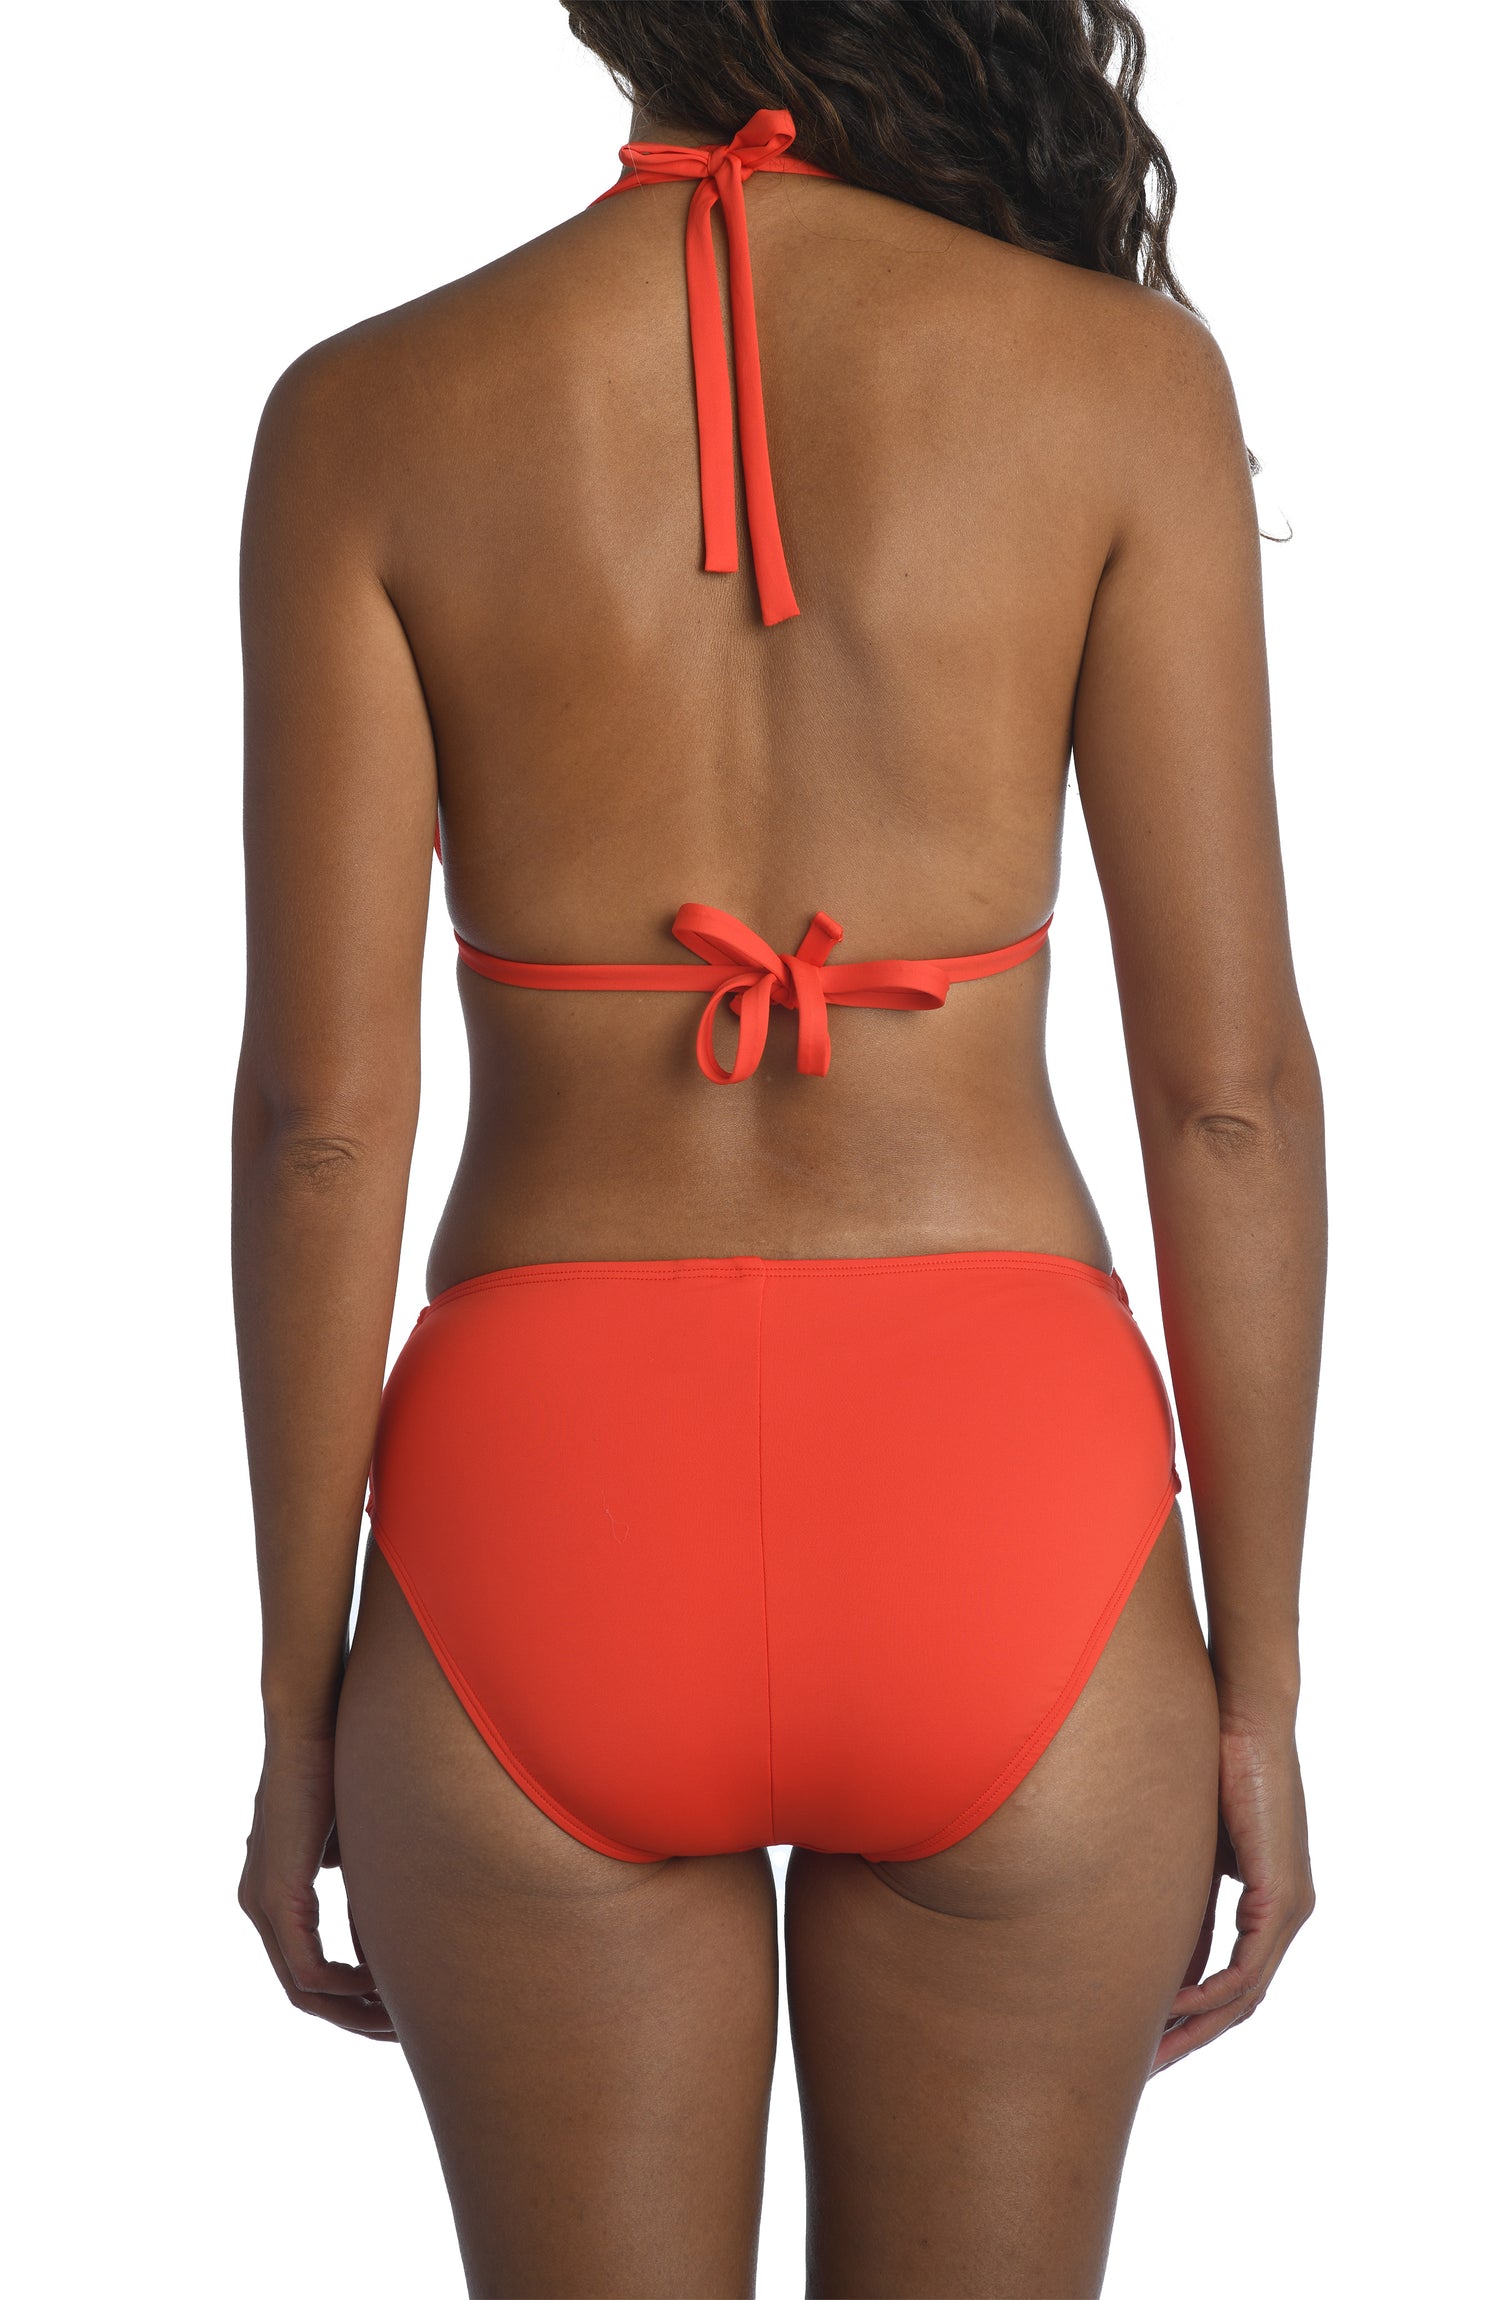 Model is wearing a paprika colored triangle swimsuit top from our Best-Selling Island Goddess collection.